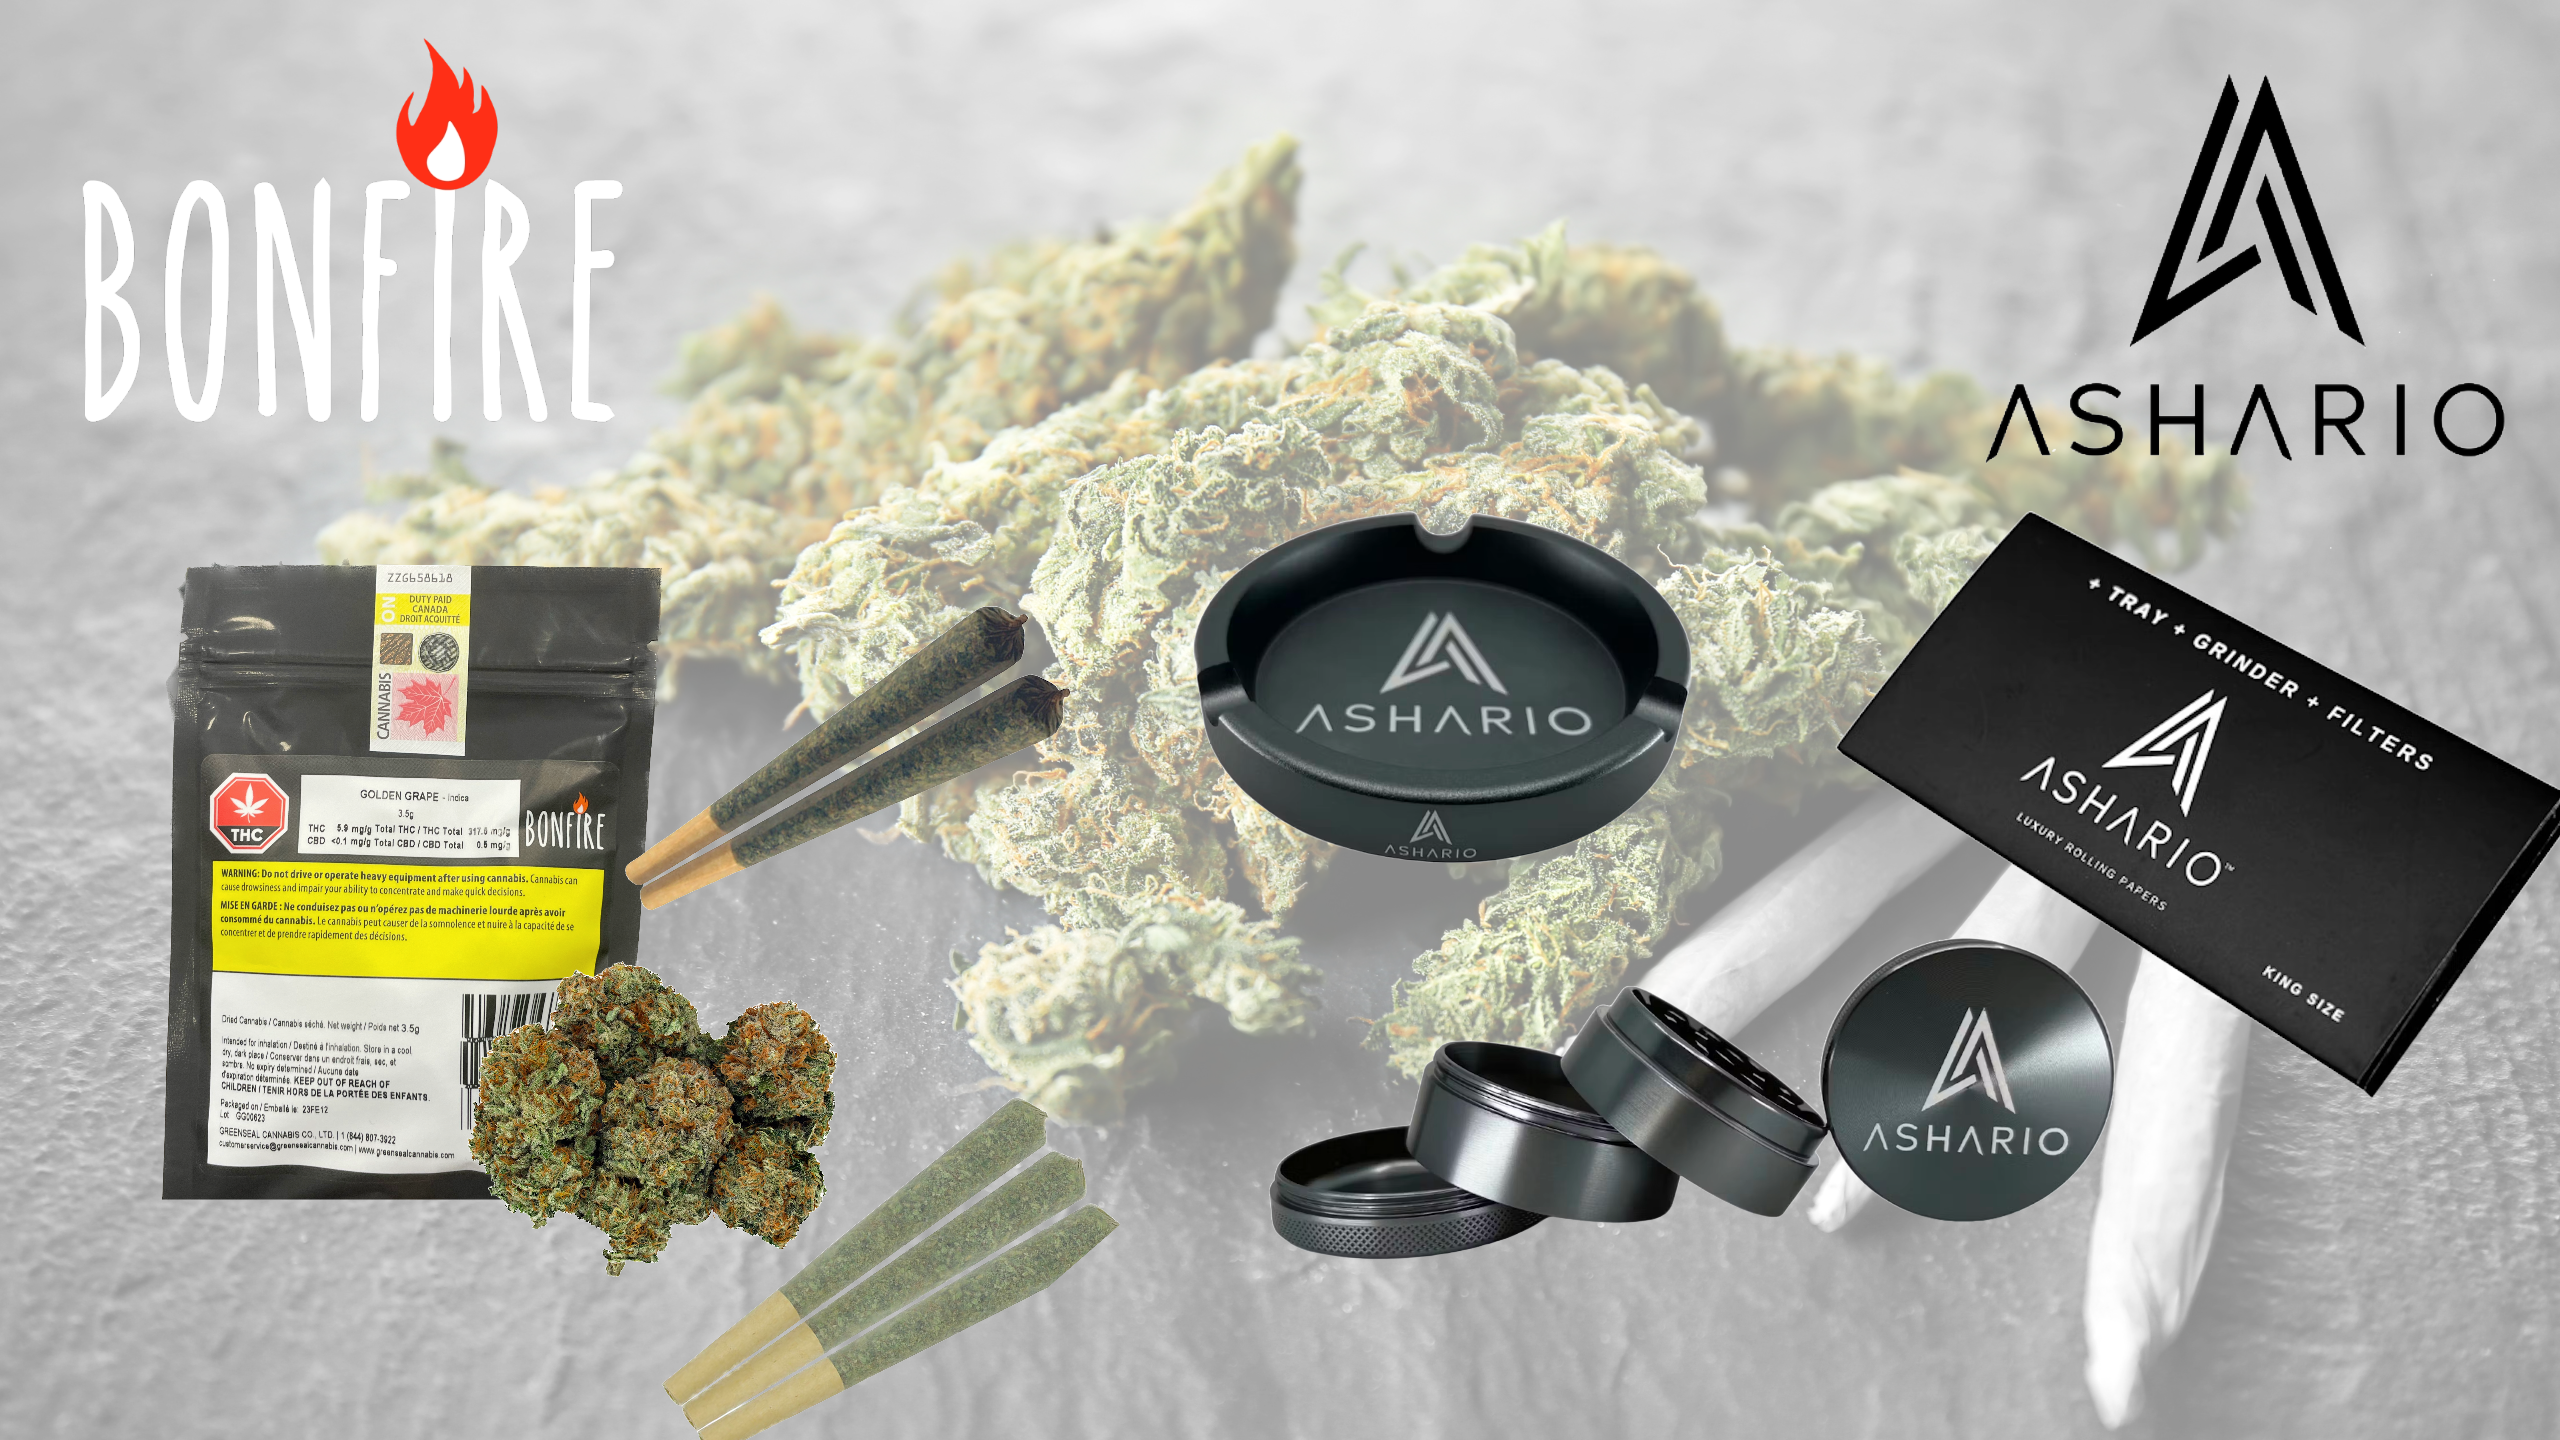 Welcome to Bonfire, where quality is not just a promise but a way of life. Dive into a world of exceptional cannabis experiences crafted with care and dedication.